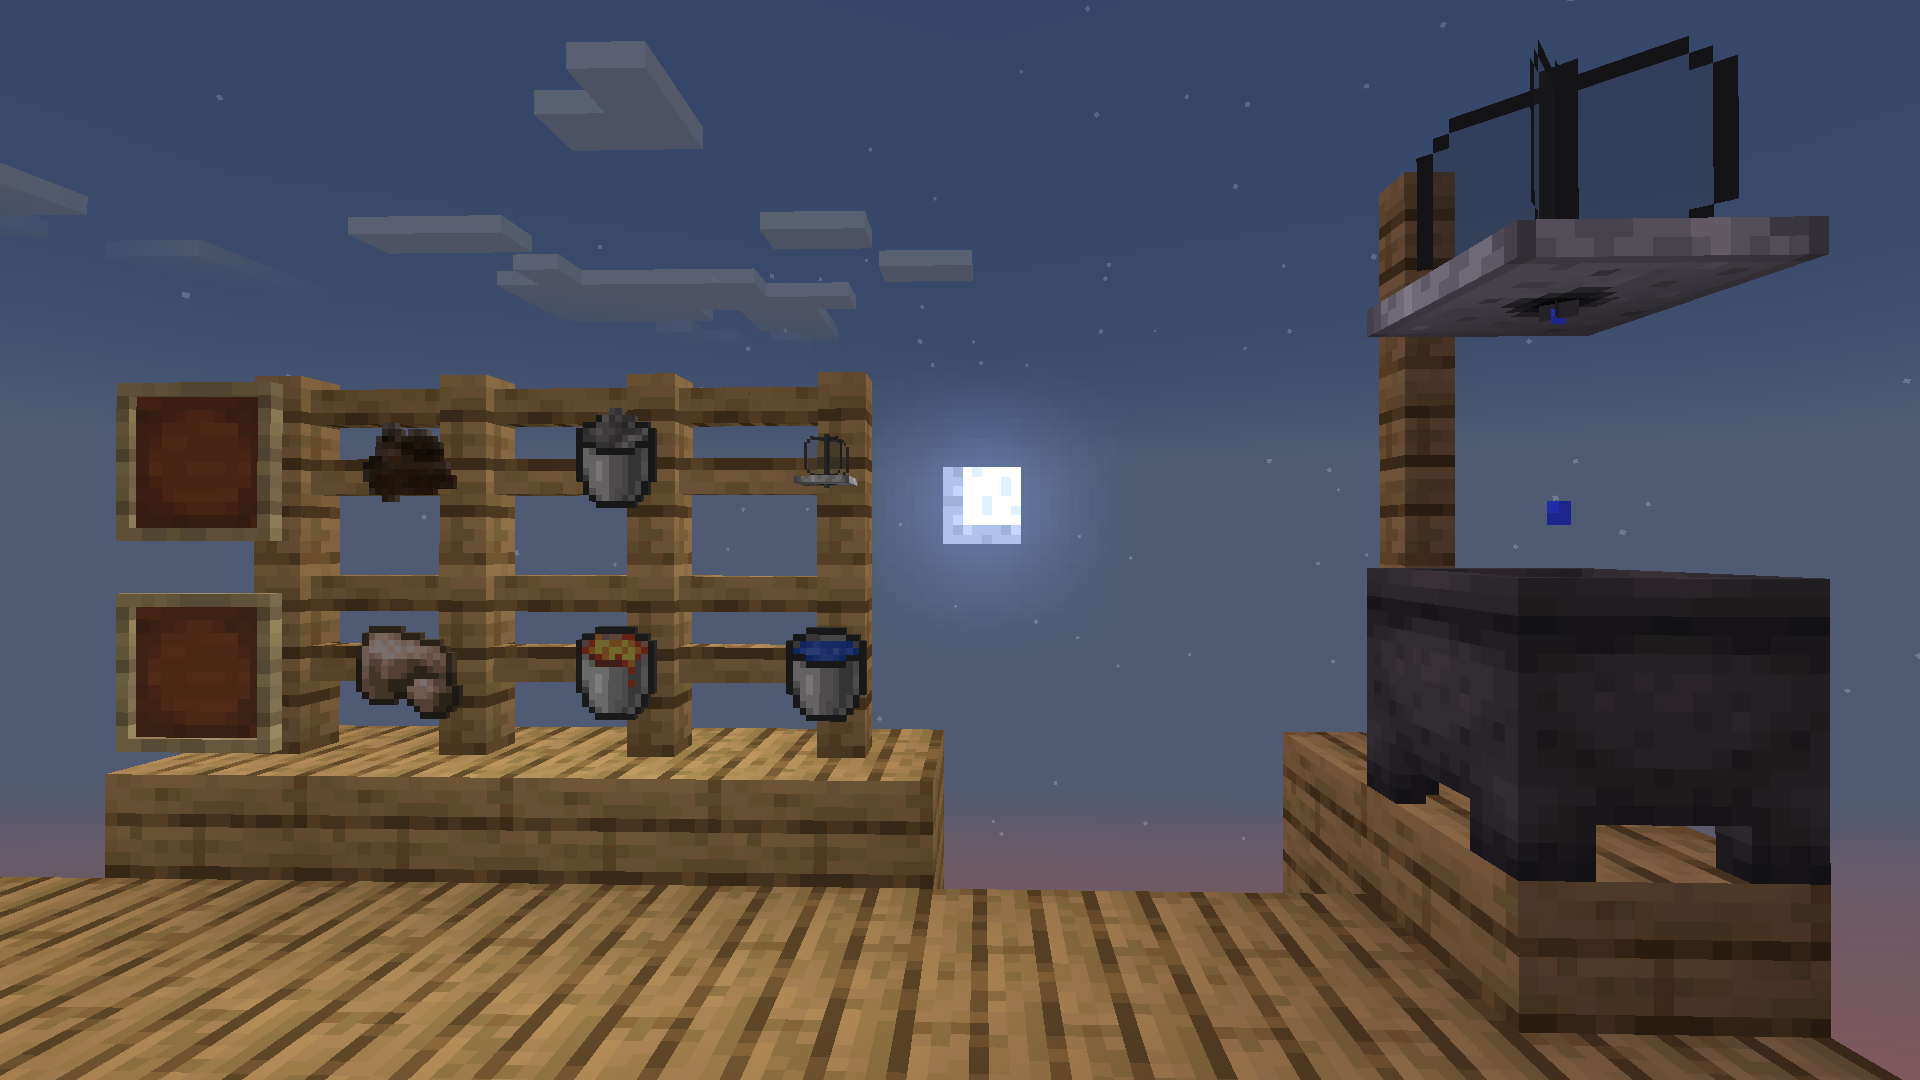 This image shows off the added block and items and what resource they enable the player to acquire.